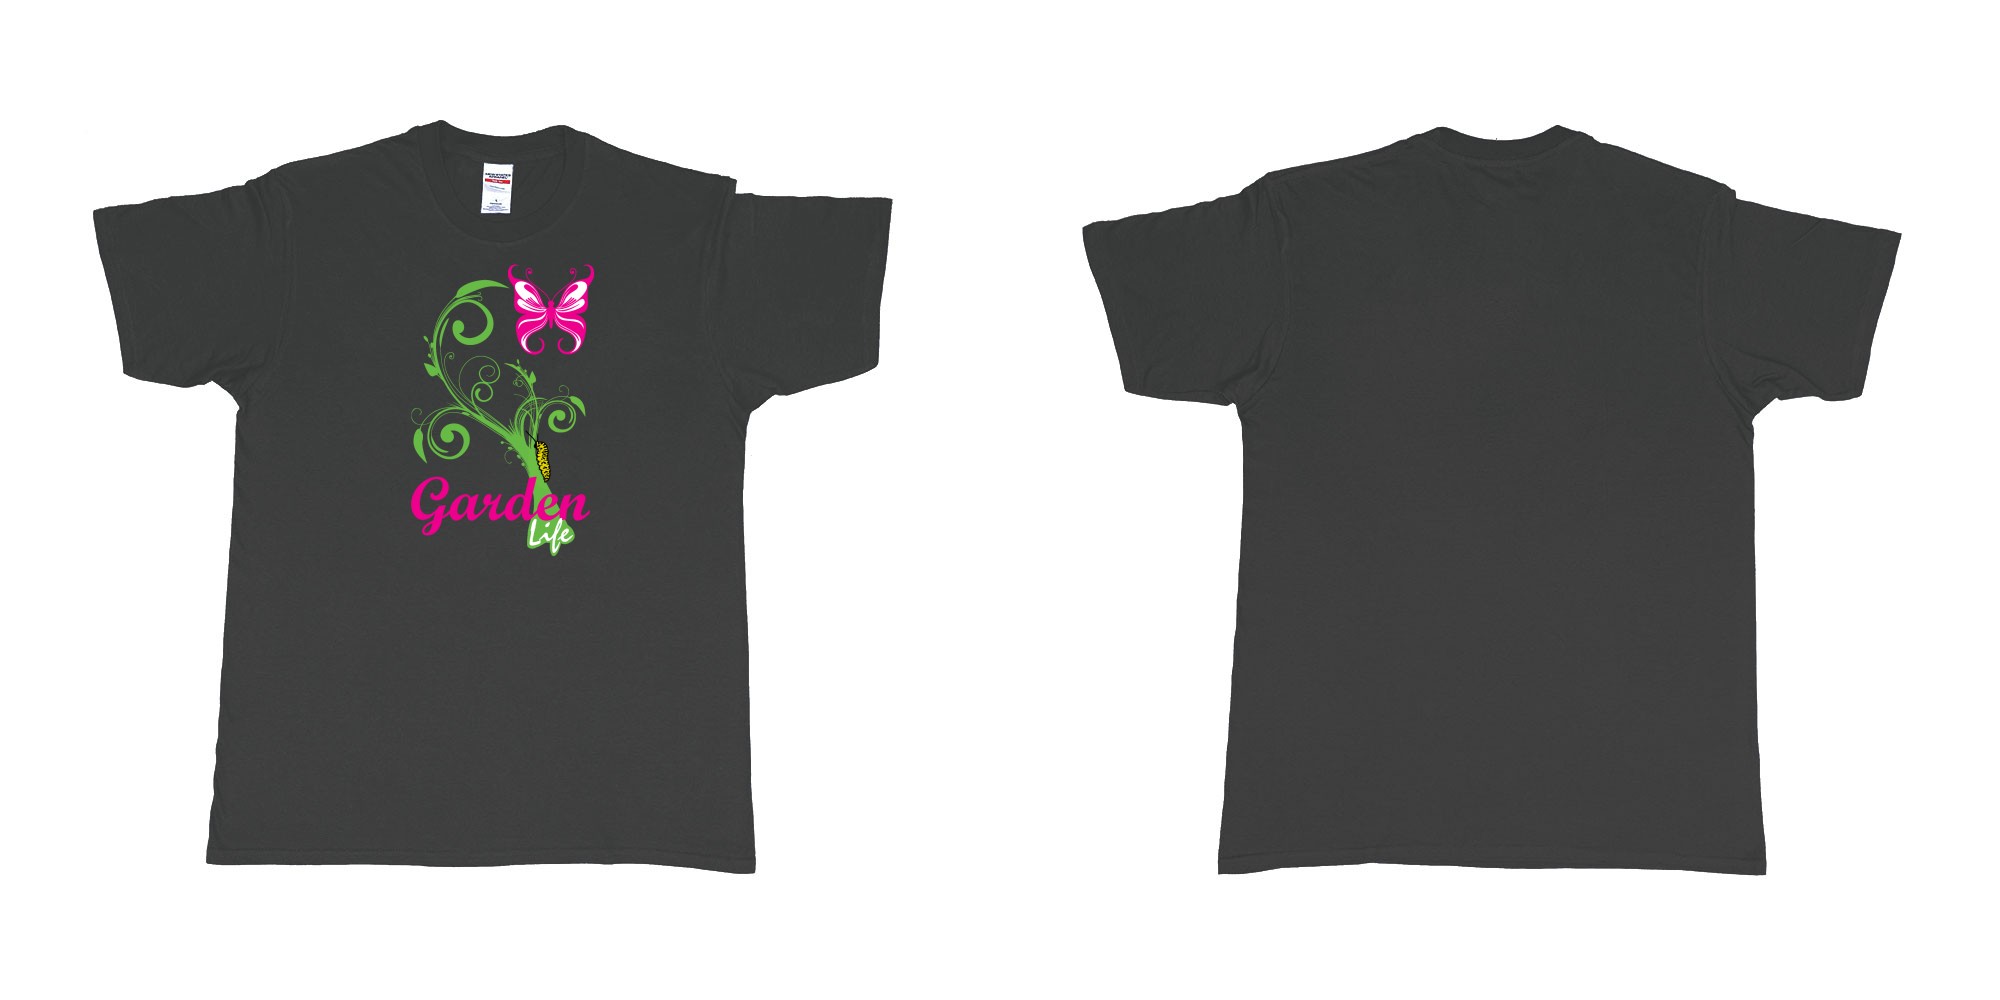 Custom tshirt design garden life transformation from a caterpillar and a butterfly in fabric color black choice your own text made in Bali by The Pirate Way